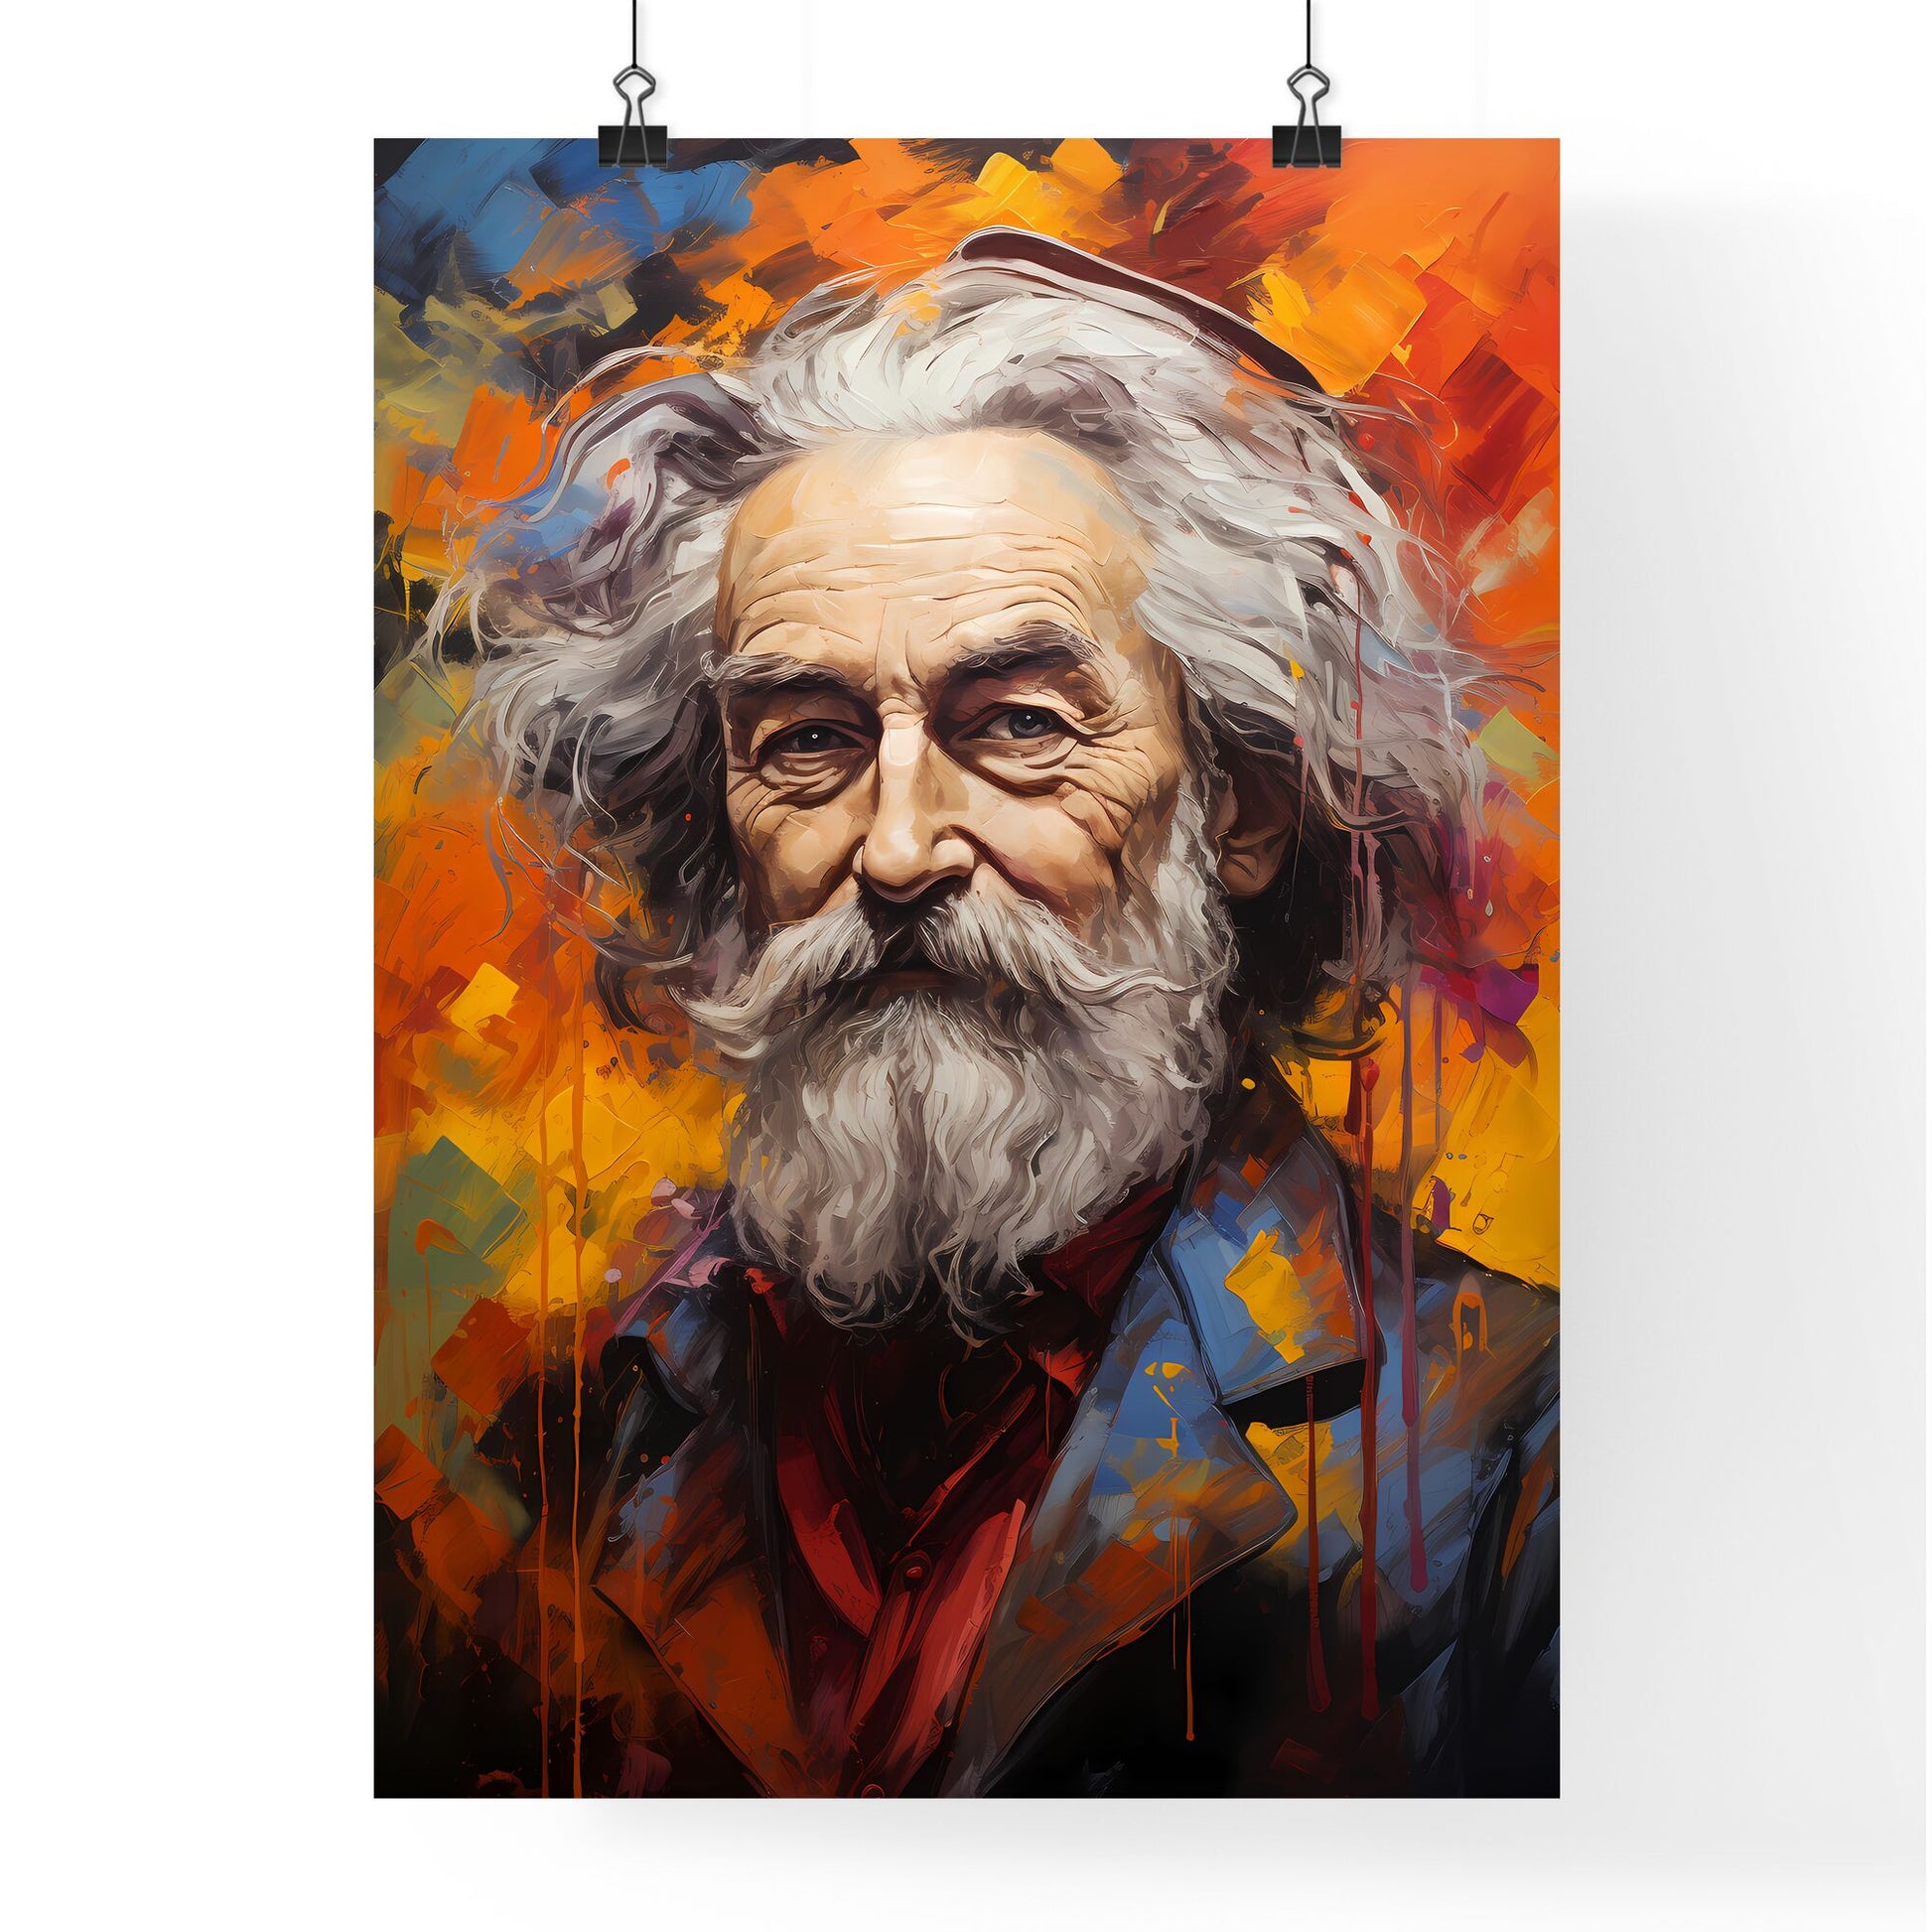 Walt Whitman - A Painting Of A Man With A Long White Beard Default Title